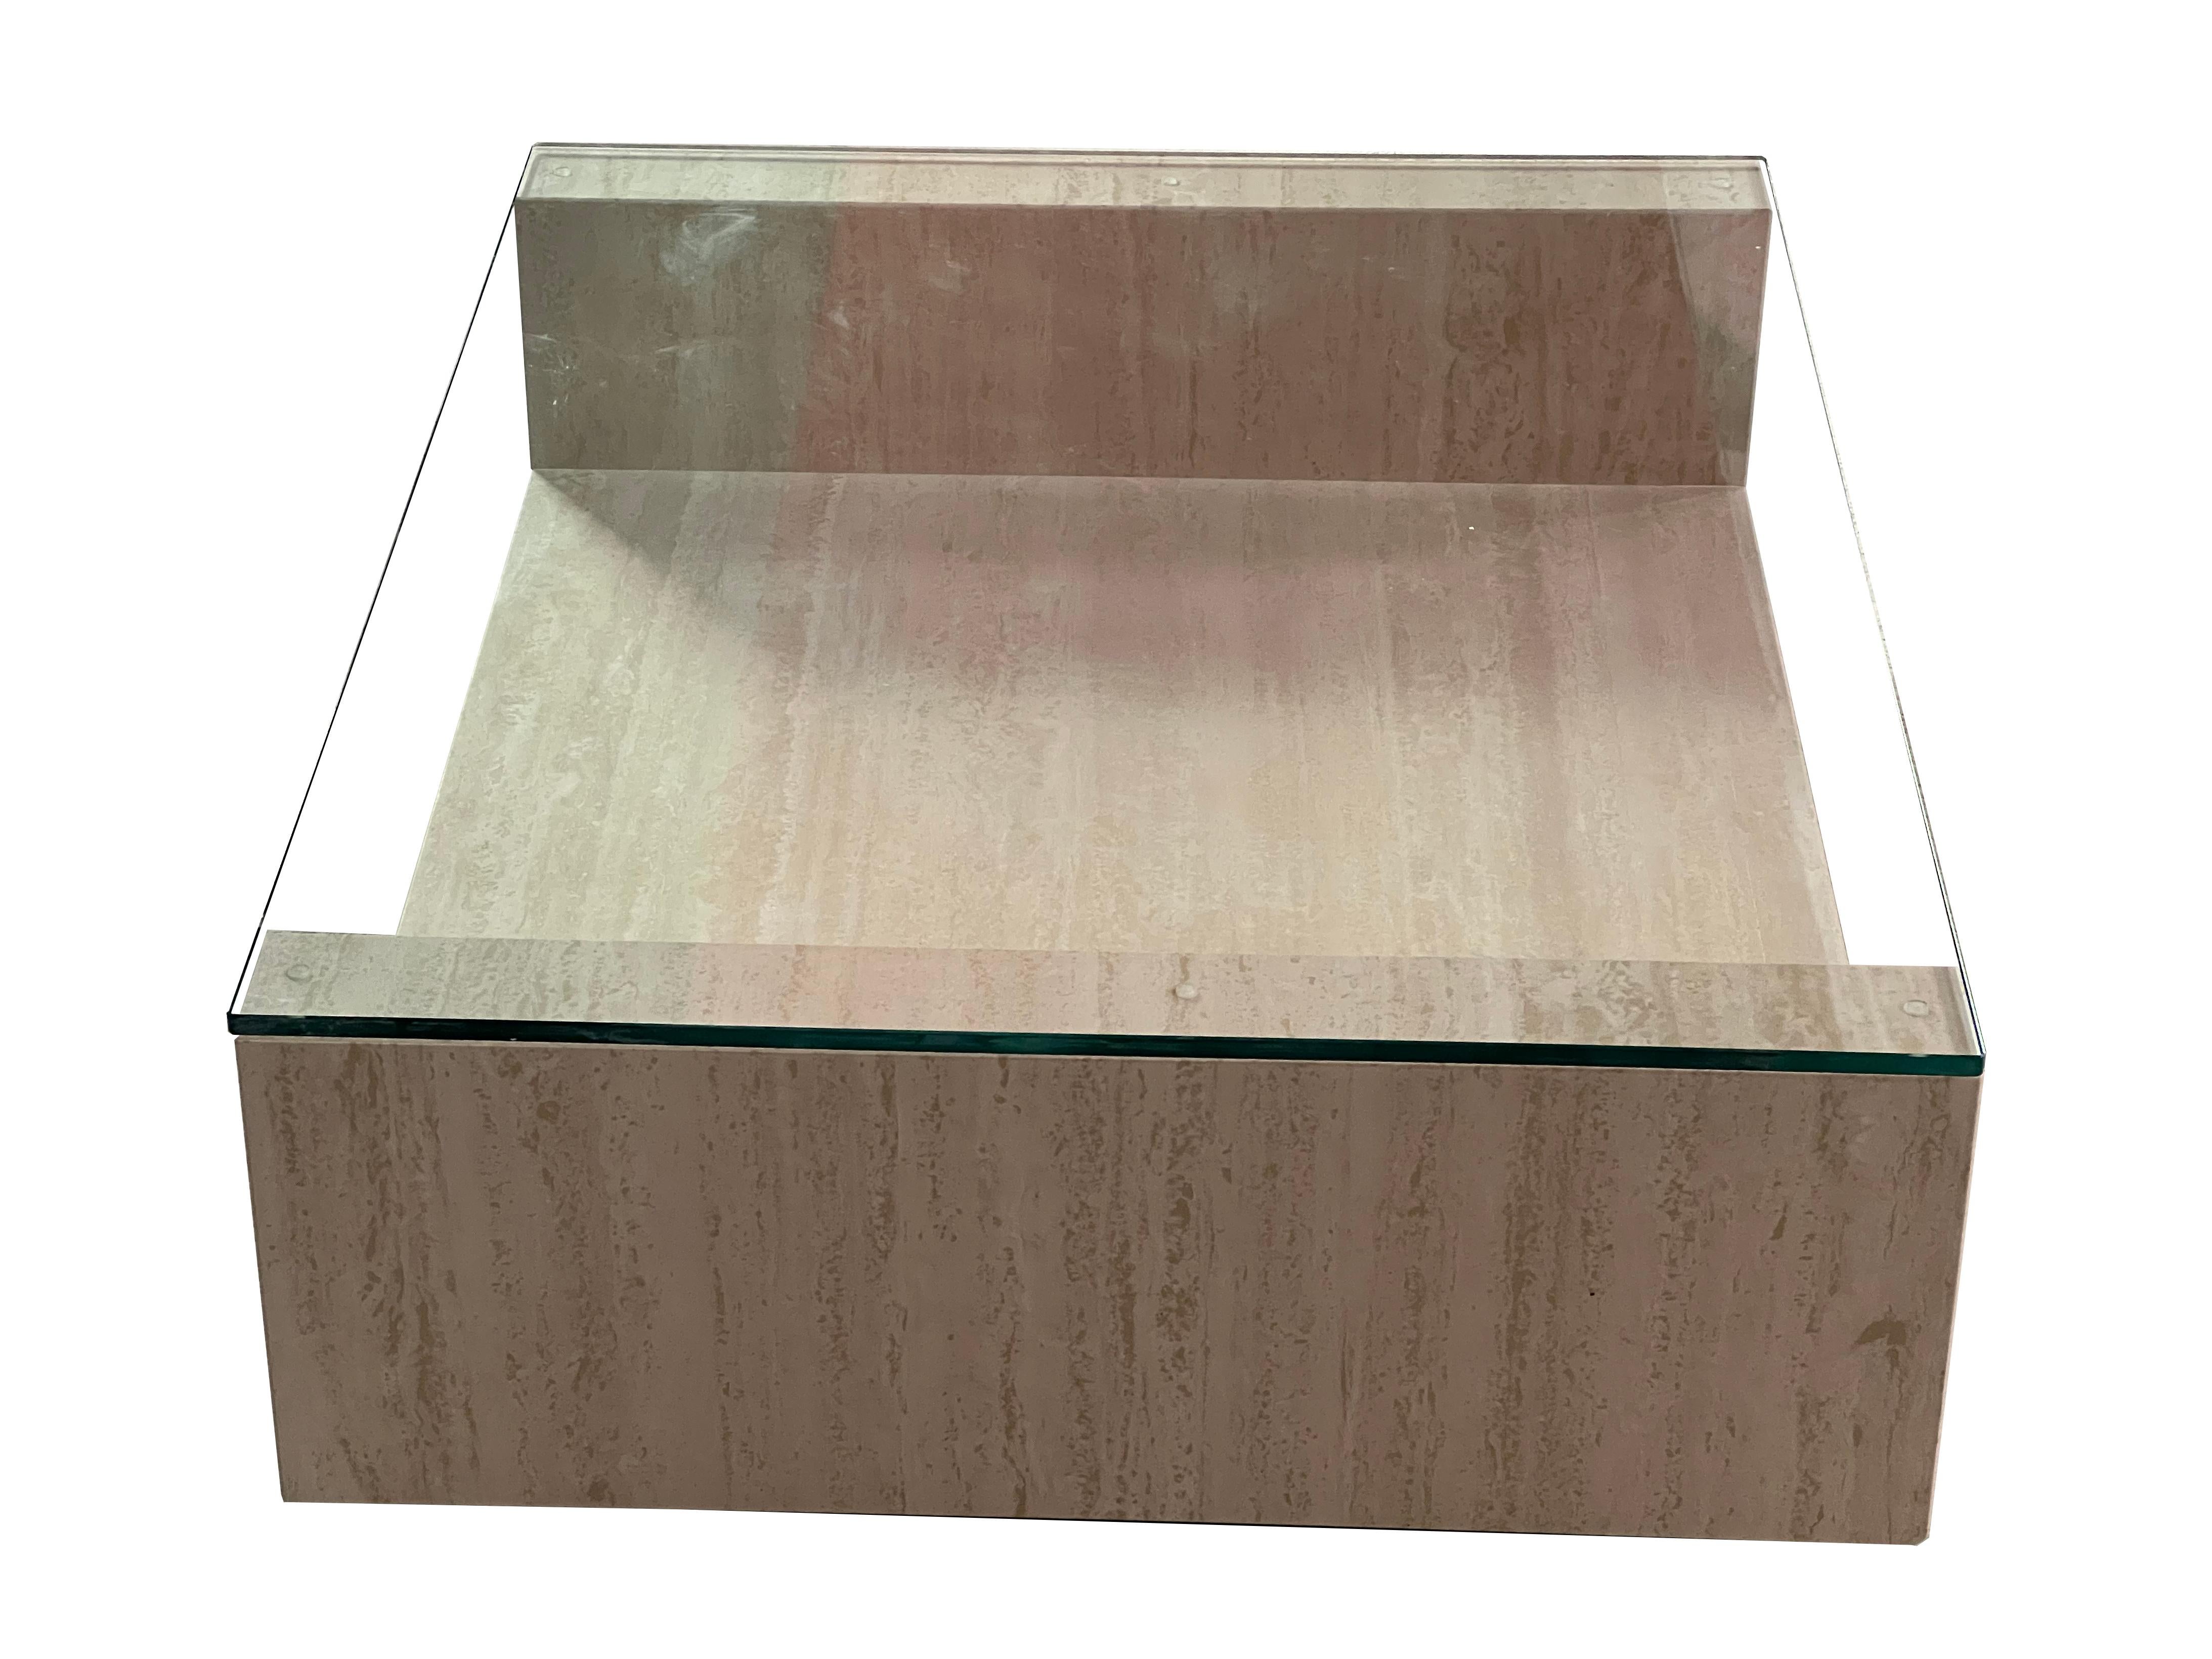 Travertine Marble AMIA Table Contemporary Design Made in Spain Meddel in Stock
The Amia coffee table is a marble design piece consisting of a U-shaped polished travertine marble top and a glass top on top. The structure has casters to facilitate its